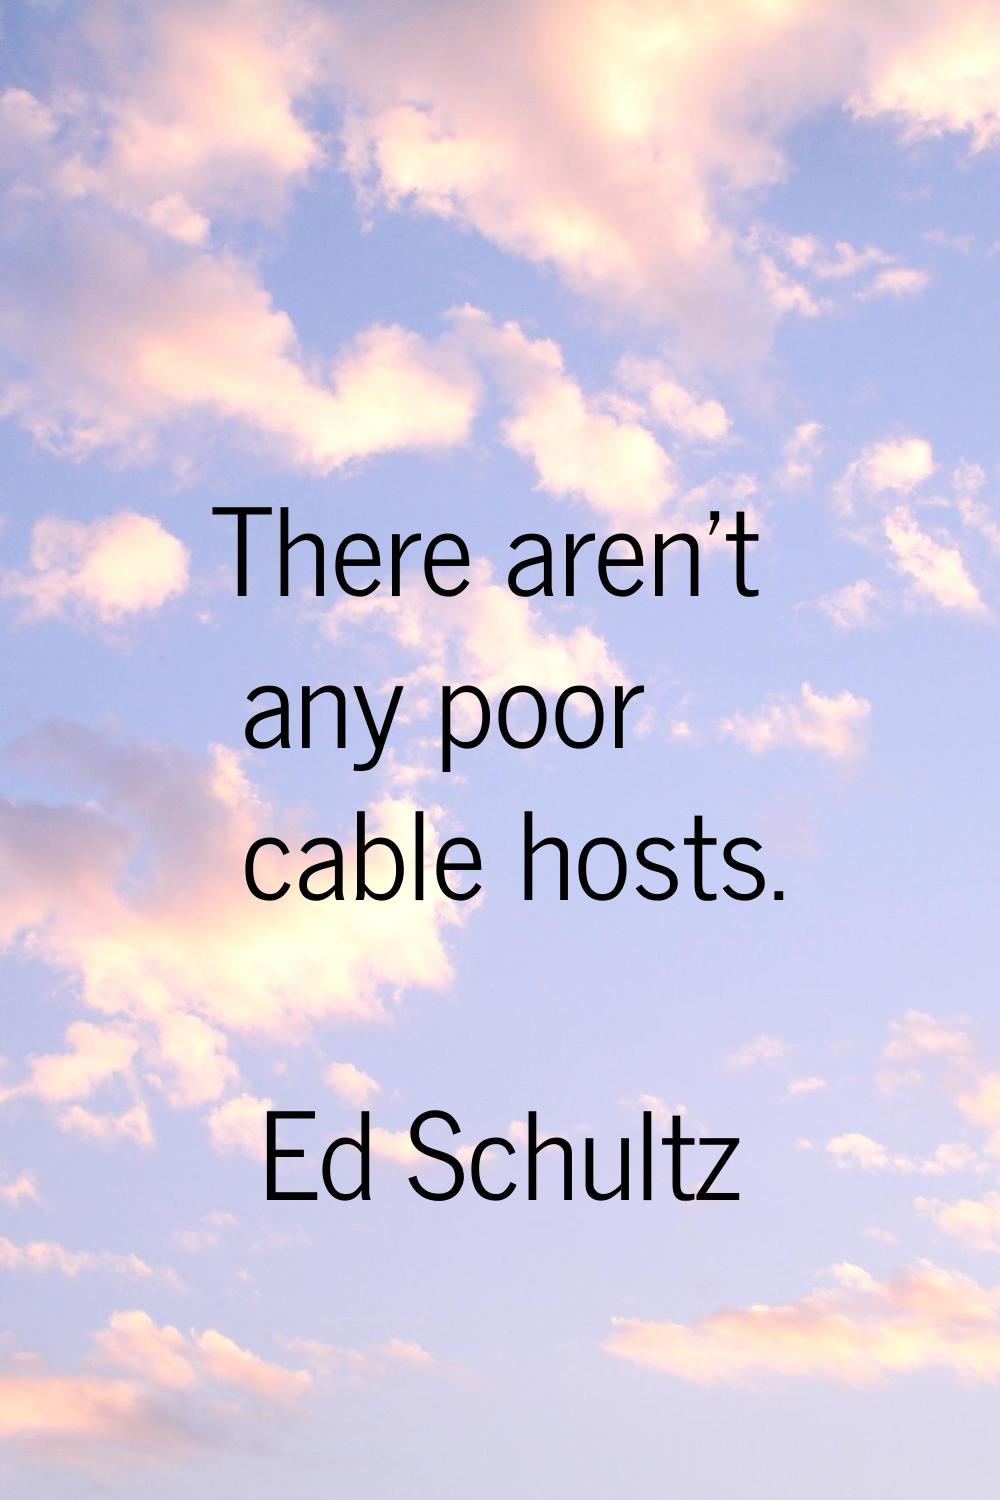 There aren't any poor cable hosts.